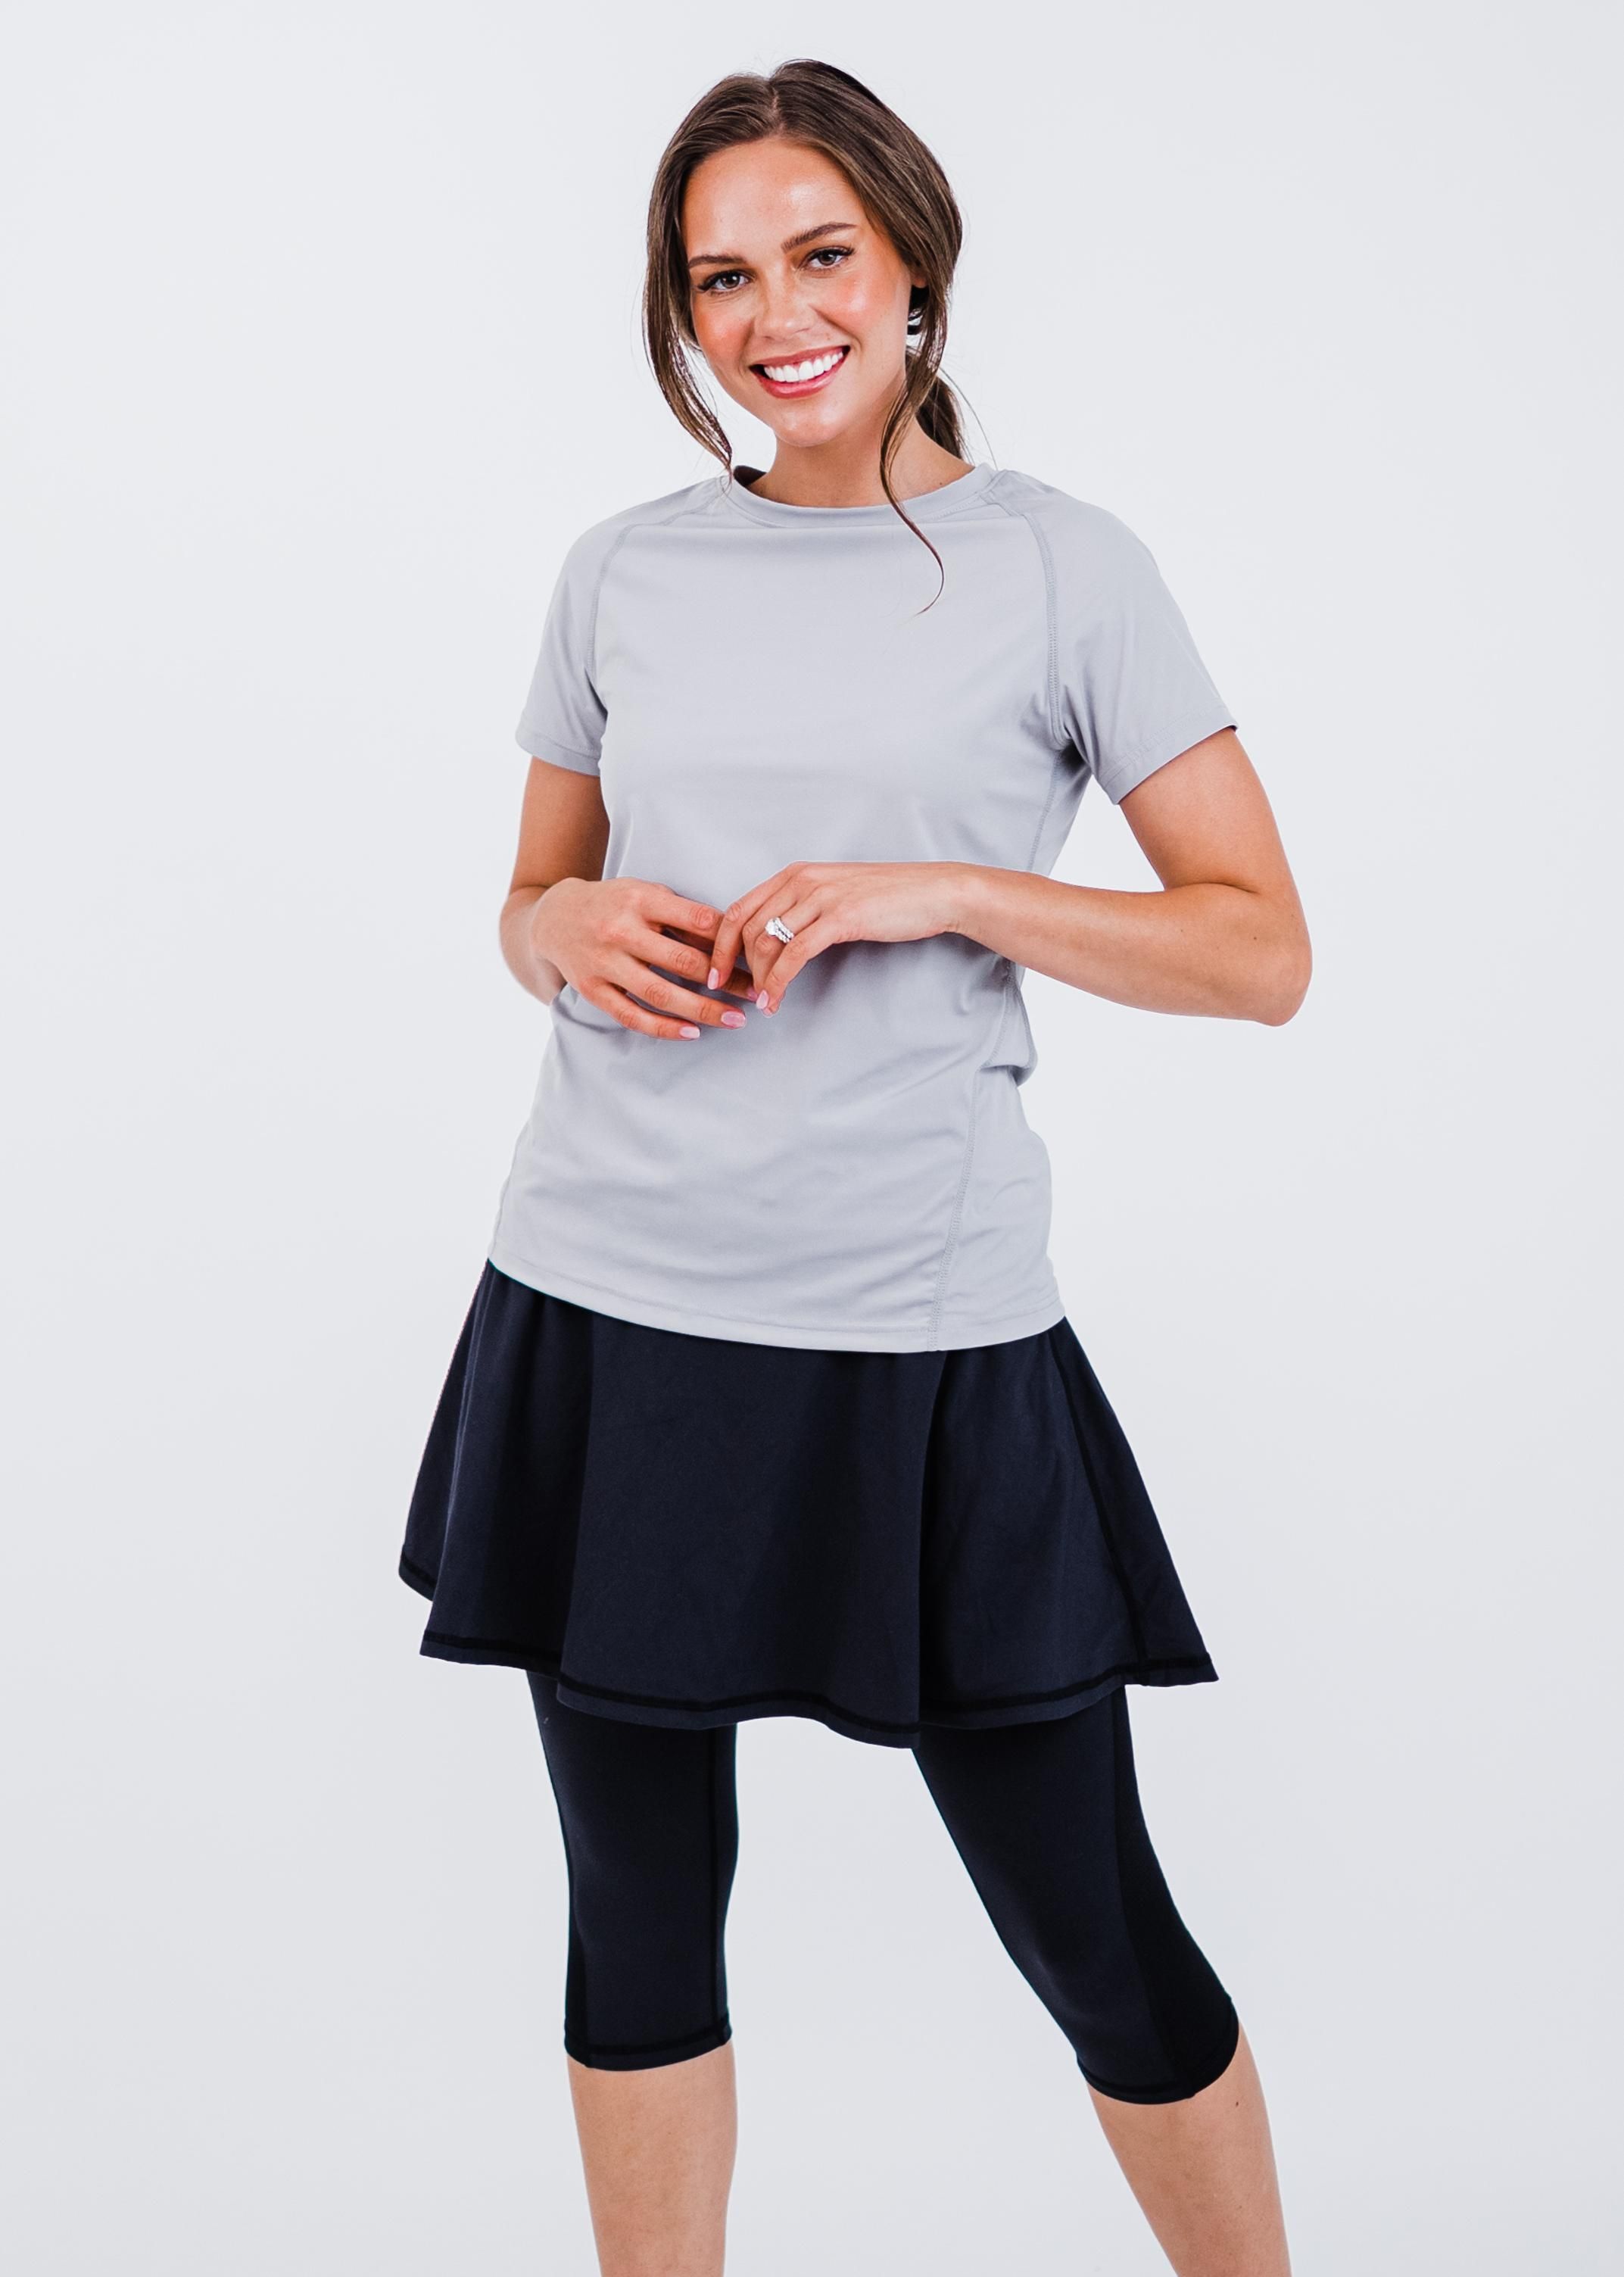 Pro Performance Top With Flowy Lycra® Sport Skirt With Attached 17" Leggings